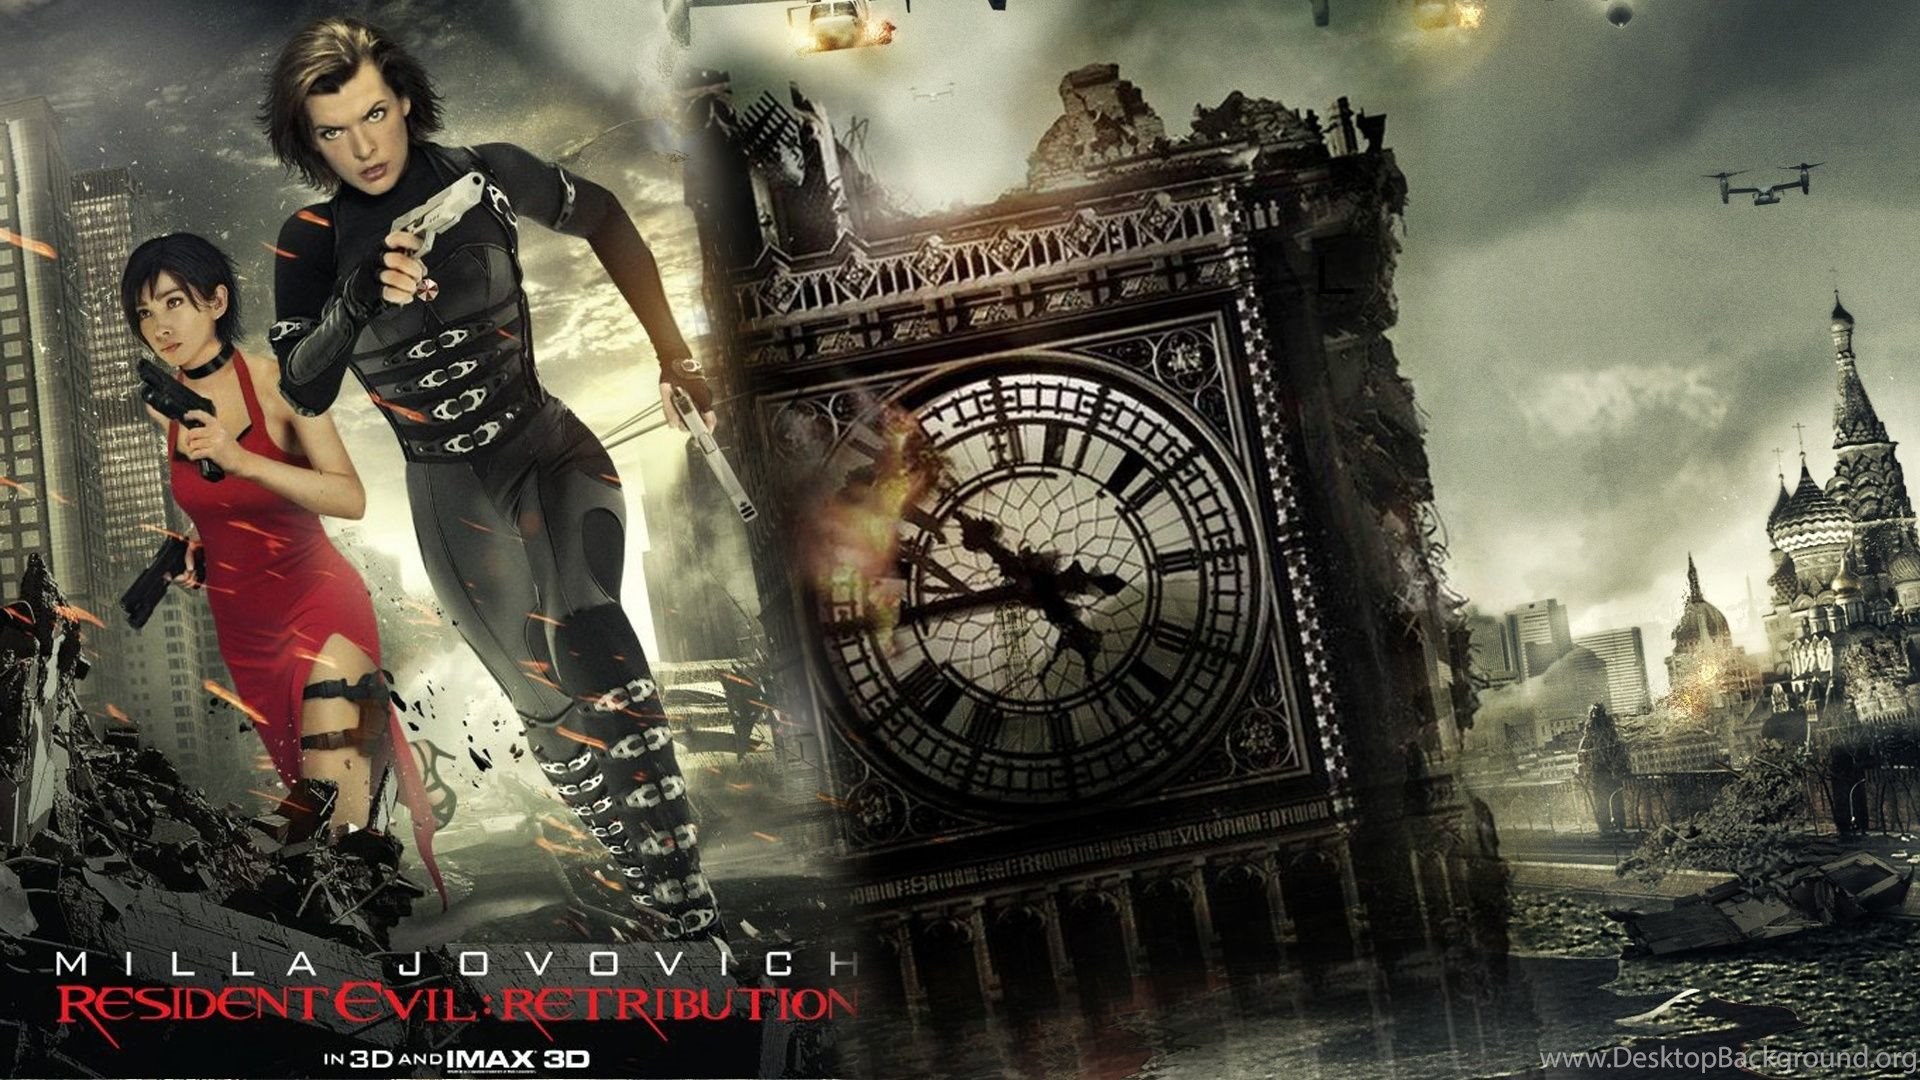 The Best and Most Comprehensive Resident Evil Wallpaper 1920x1080